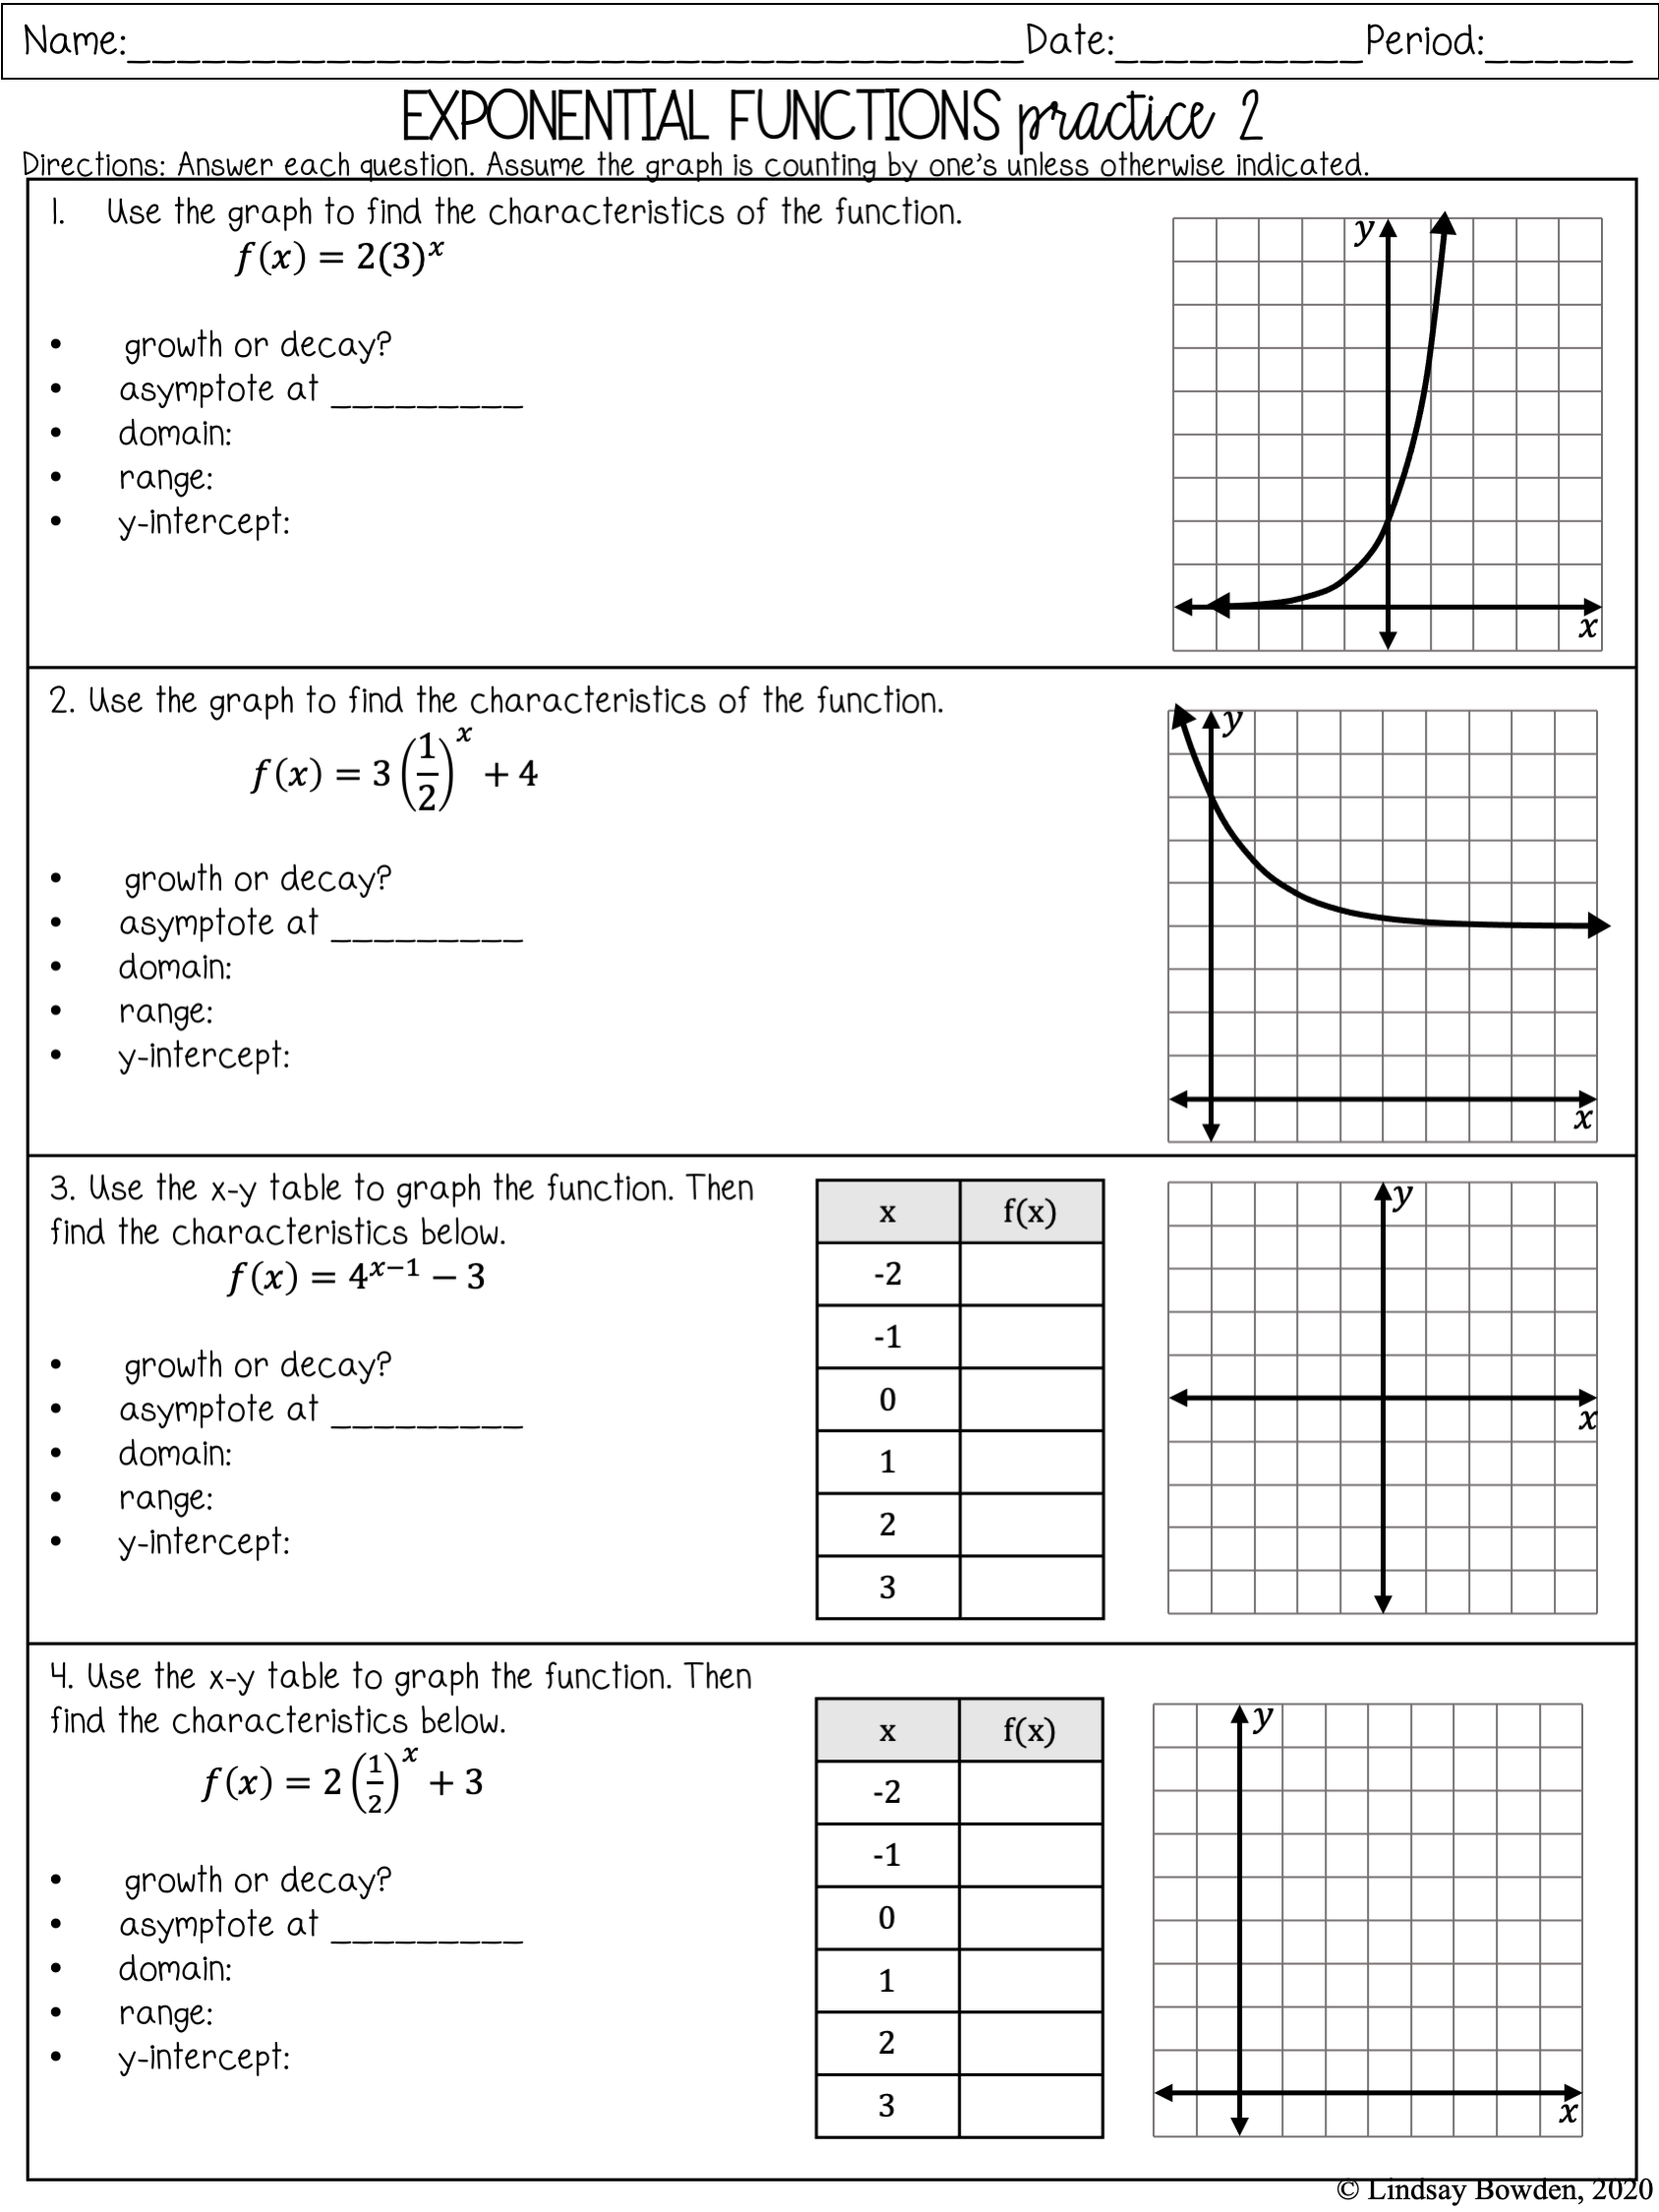 Exponential Functions Notes and Worksheets - Lindsay Bowden For Exponential Functions Worksheet Answers